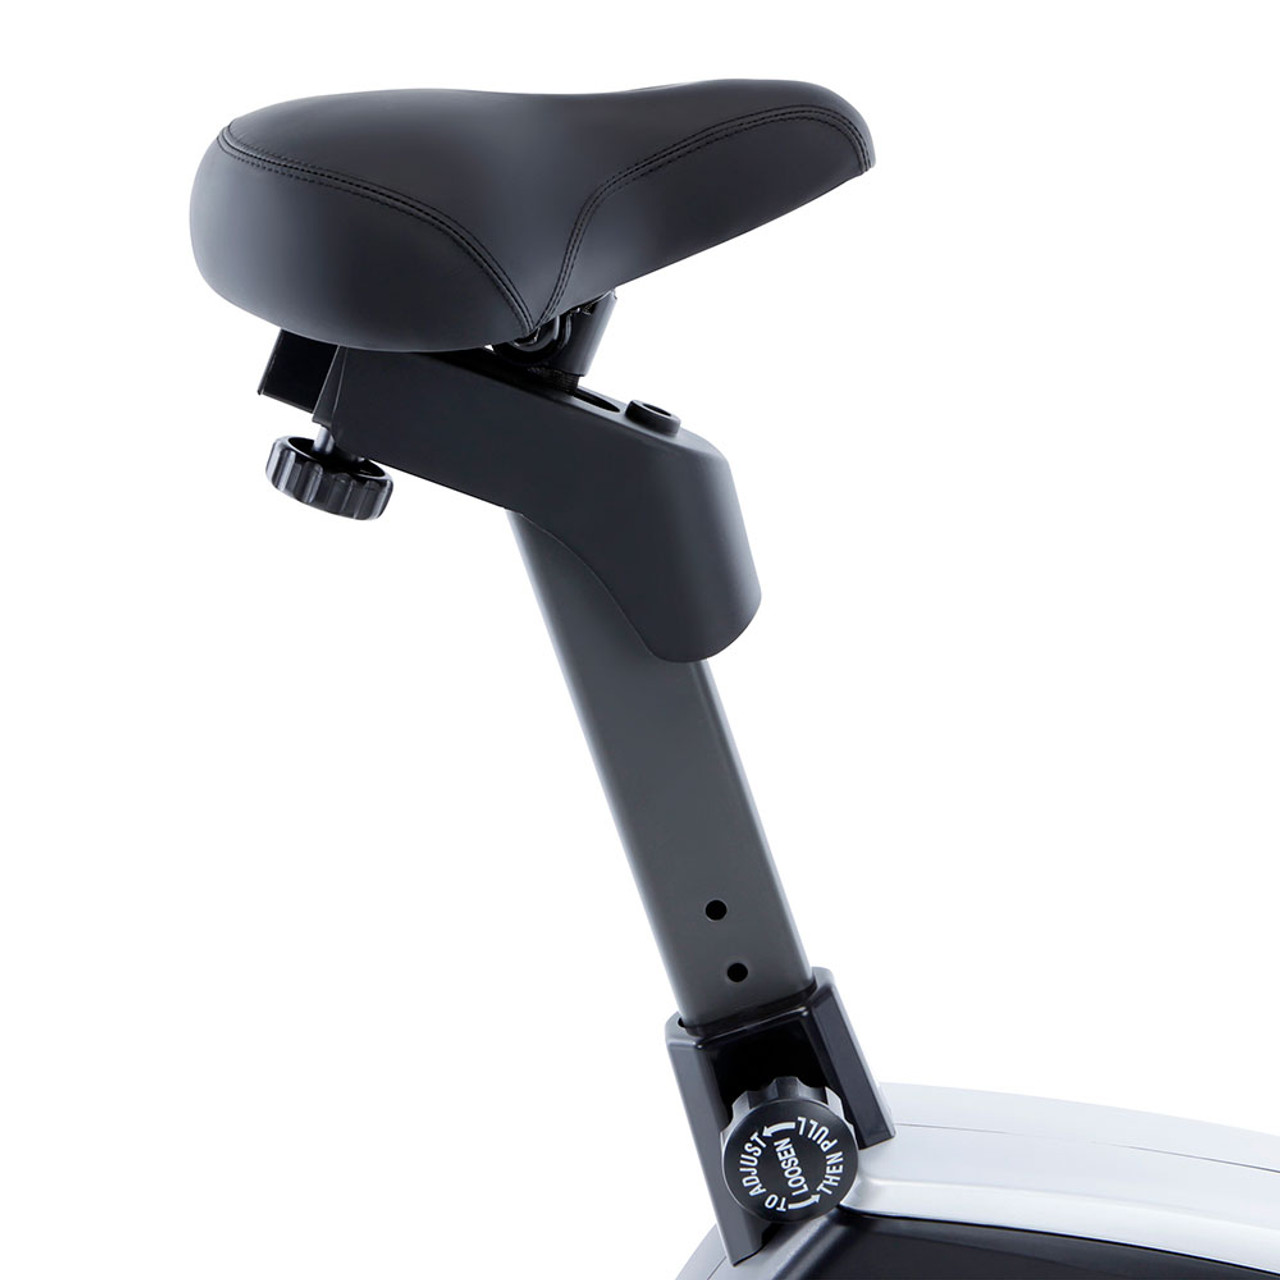 Regenerating Magnetic Upright Exercise Bike Marcy ME-702 with adjustable seat - perfect for any height